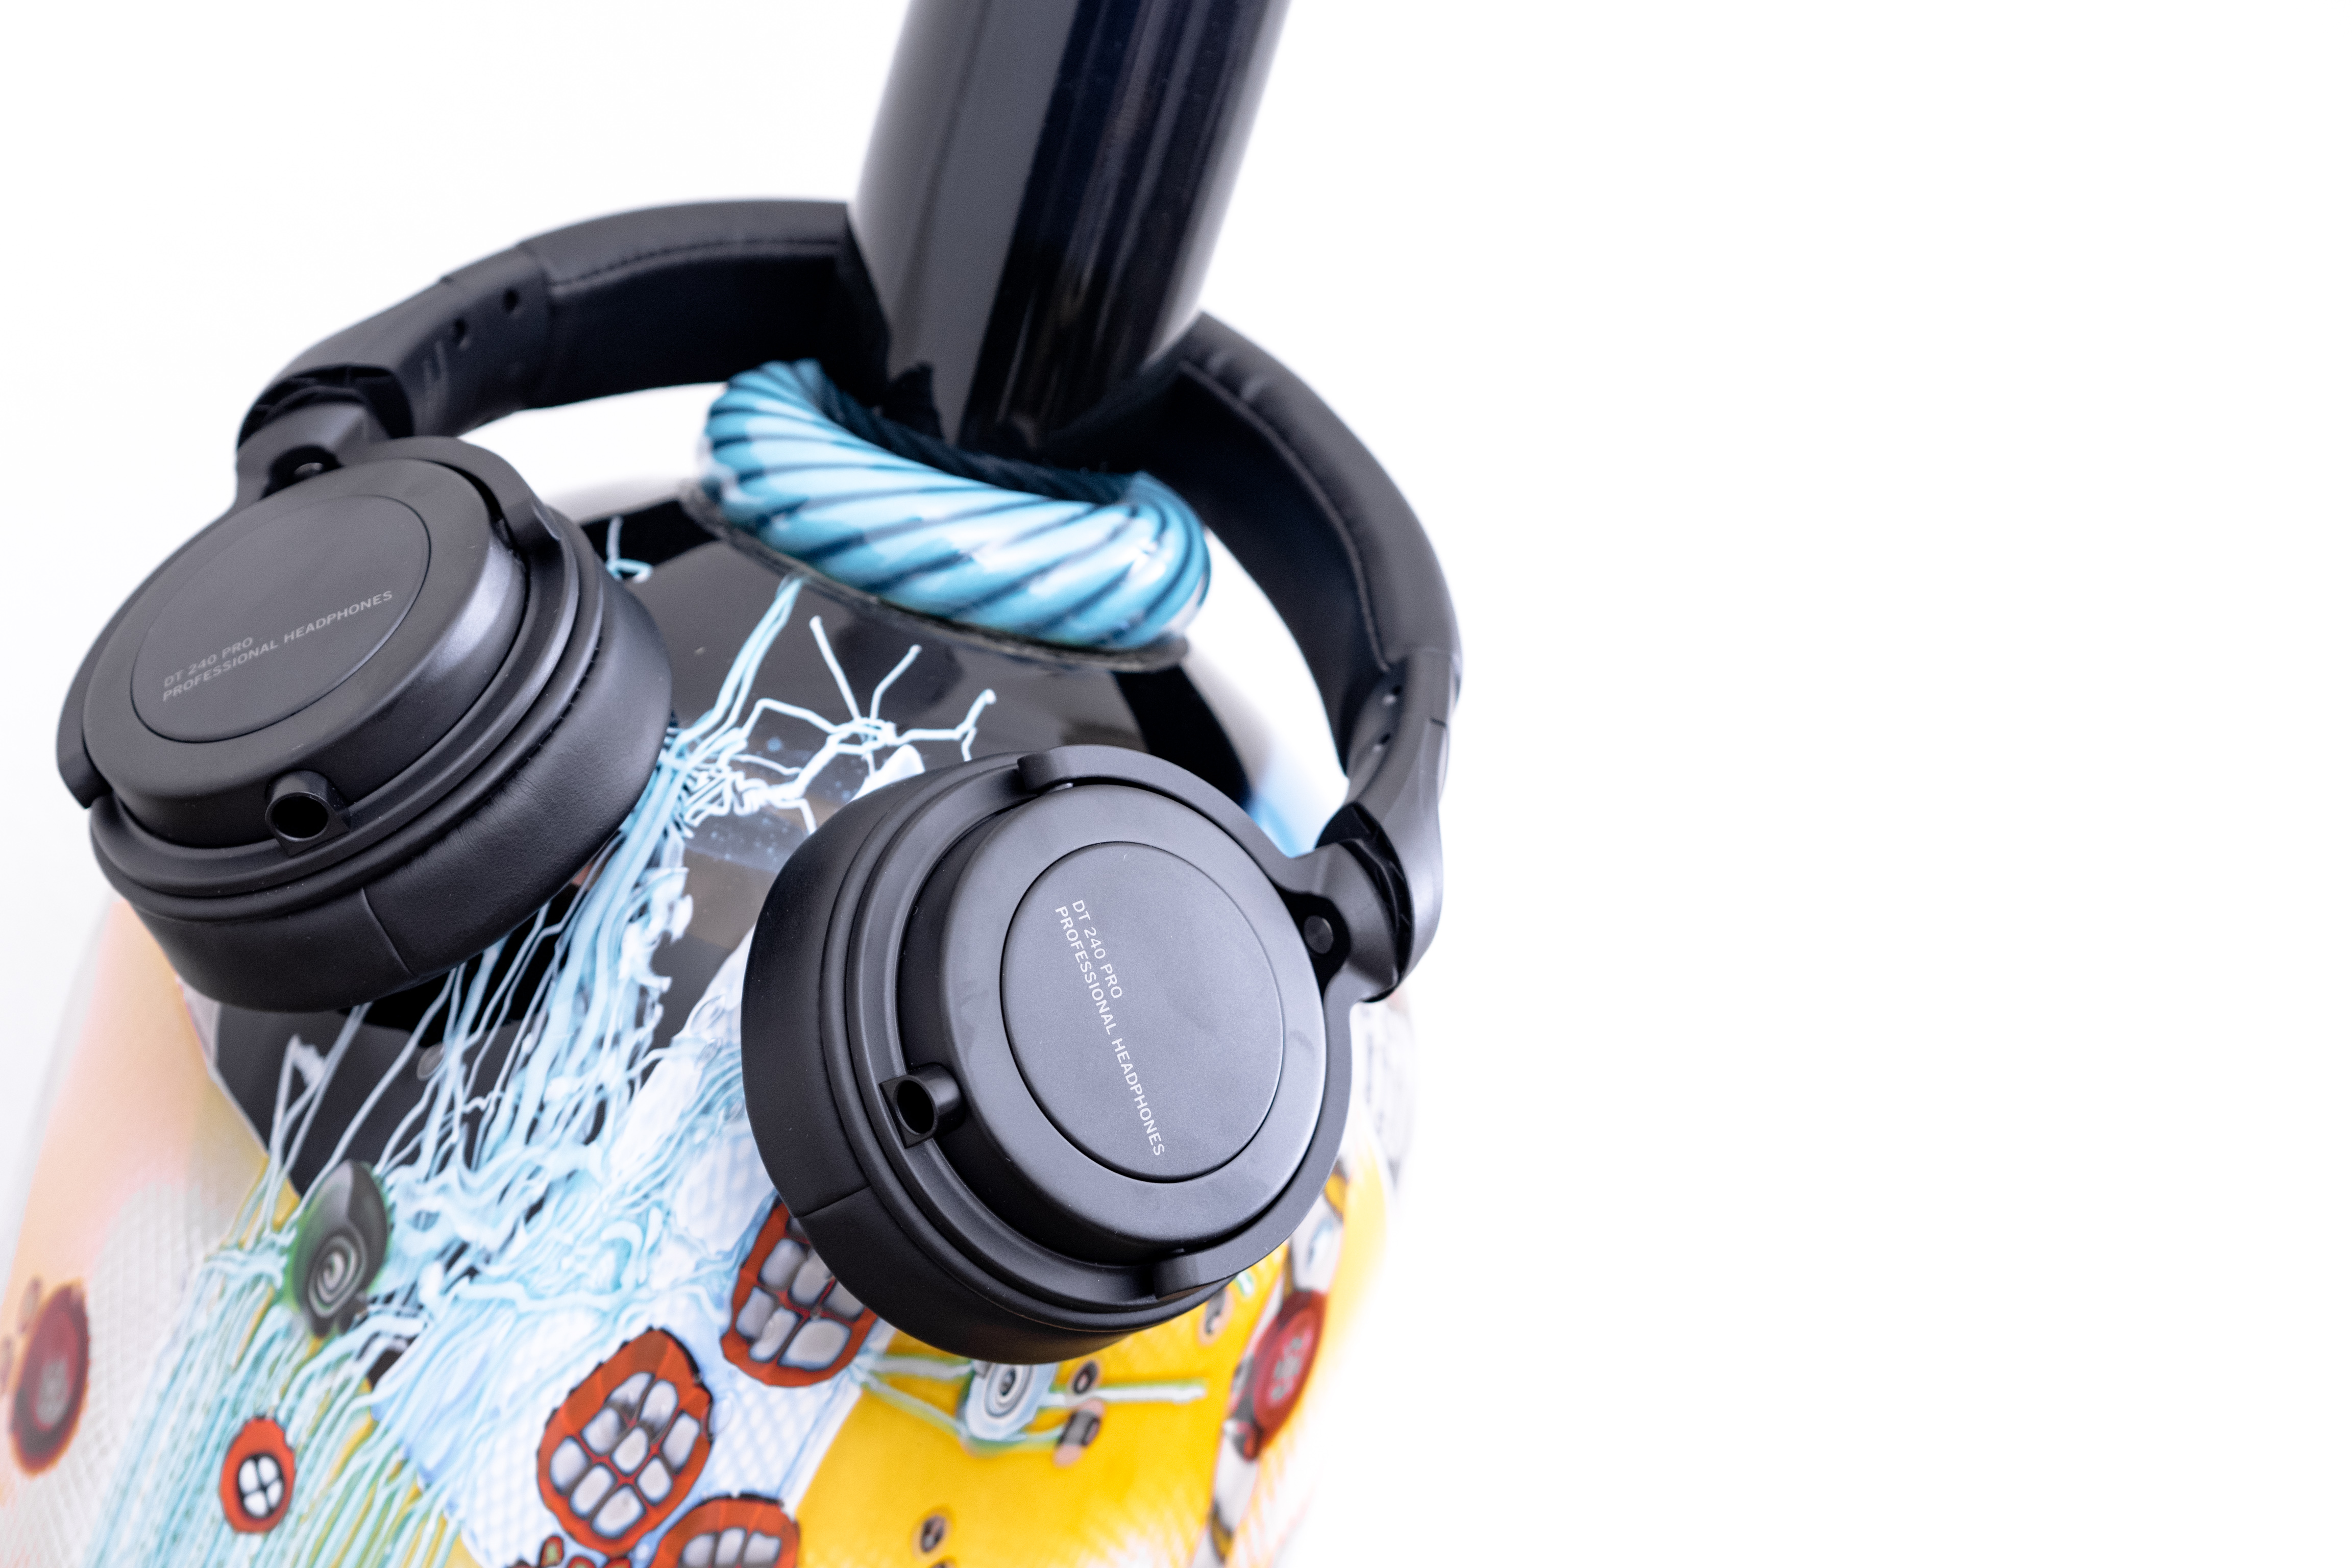 Beyerdynamic DT 240 PRO headphones cable removable on-ear over-ear comfort audio-technica ATH-m40X studio commuter